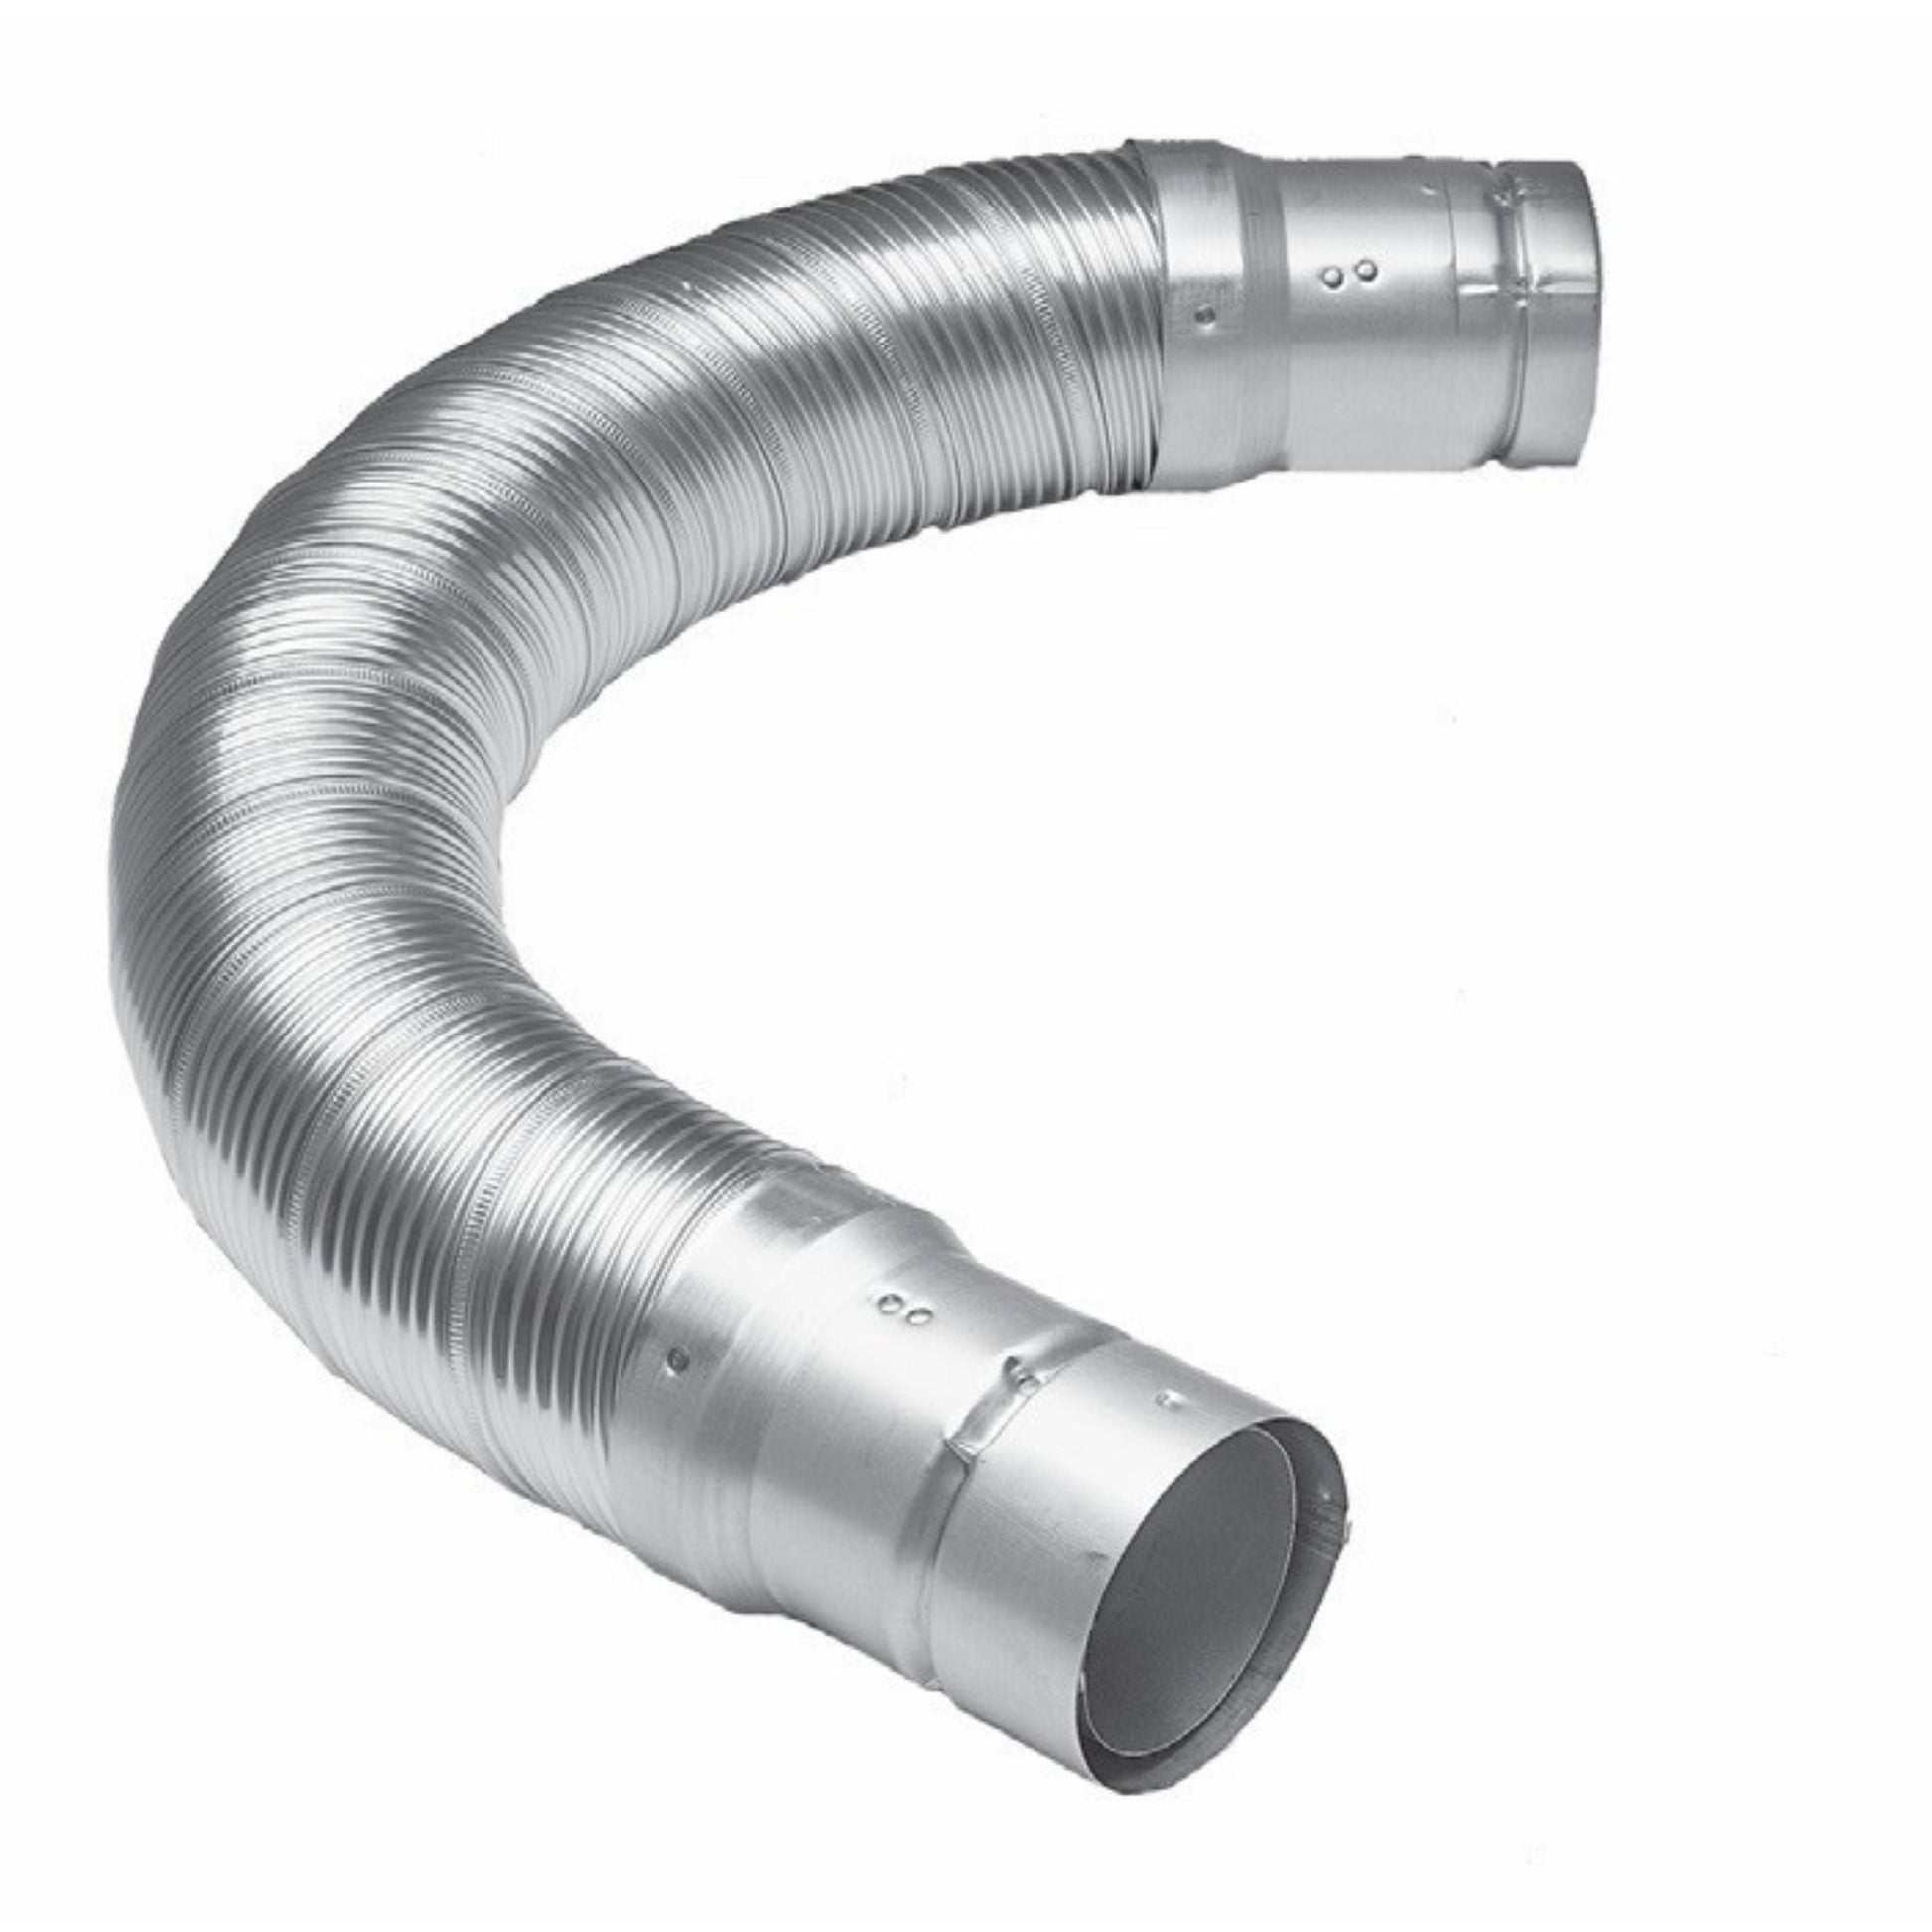 DuraVent DuraConnect II B-Vent 5" x 60" Flexible Double-Wall Gas Vent Connector